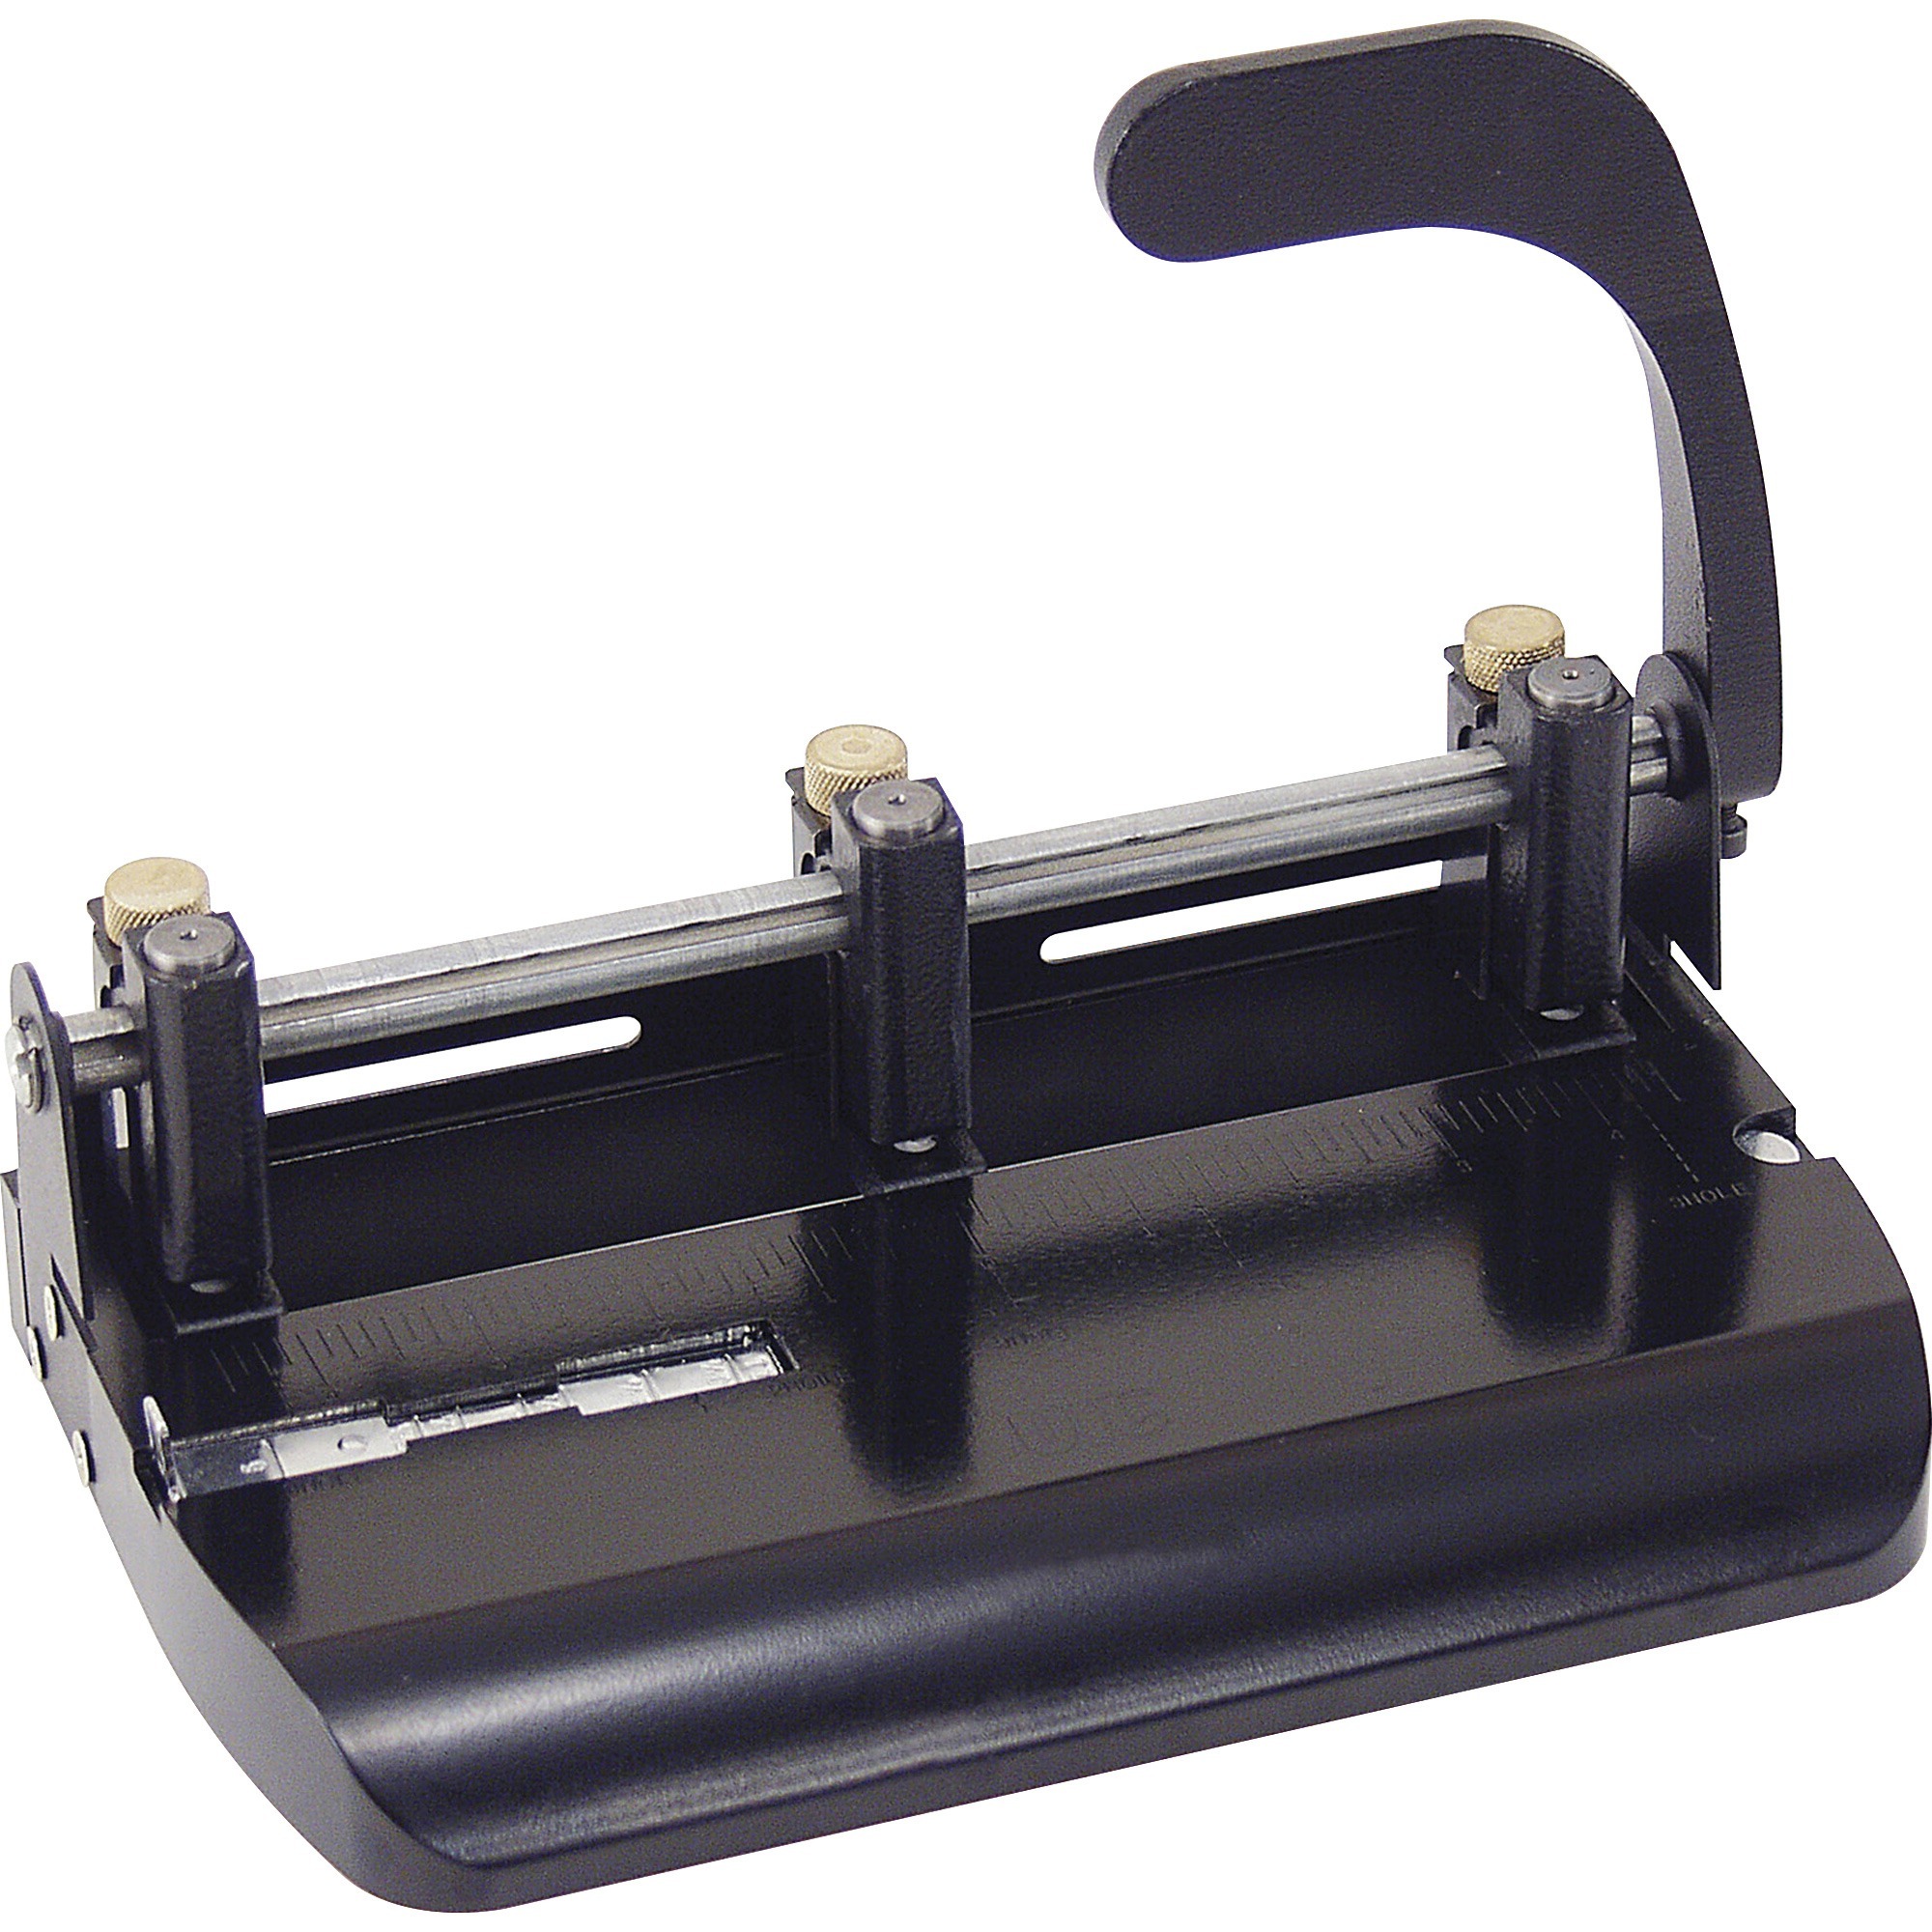 MP250 Hole Punch - Martin Yale Industries